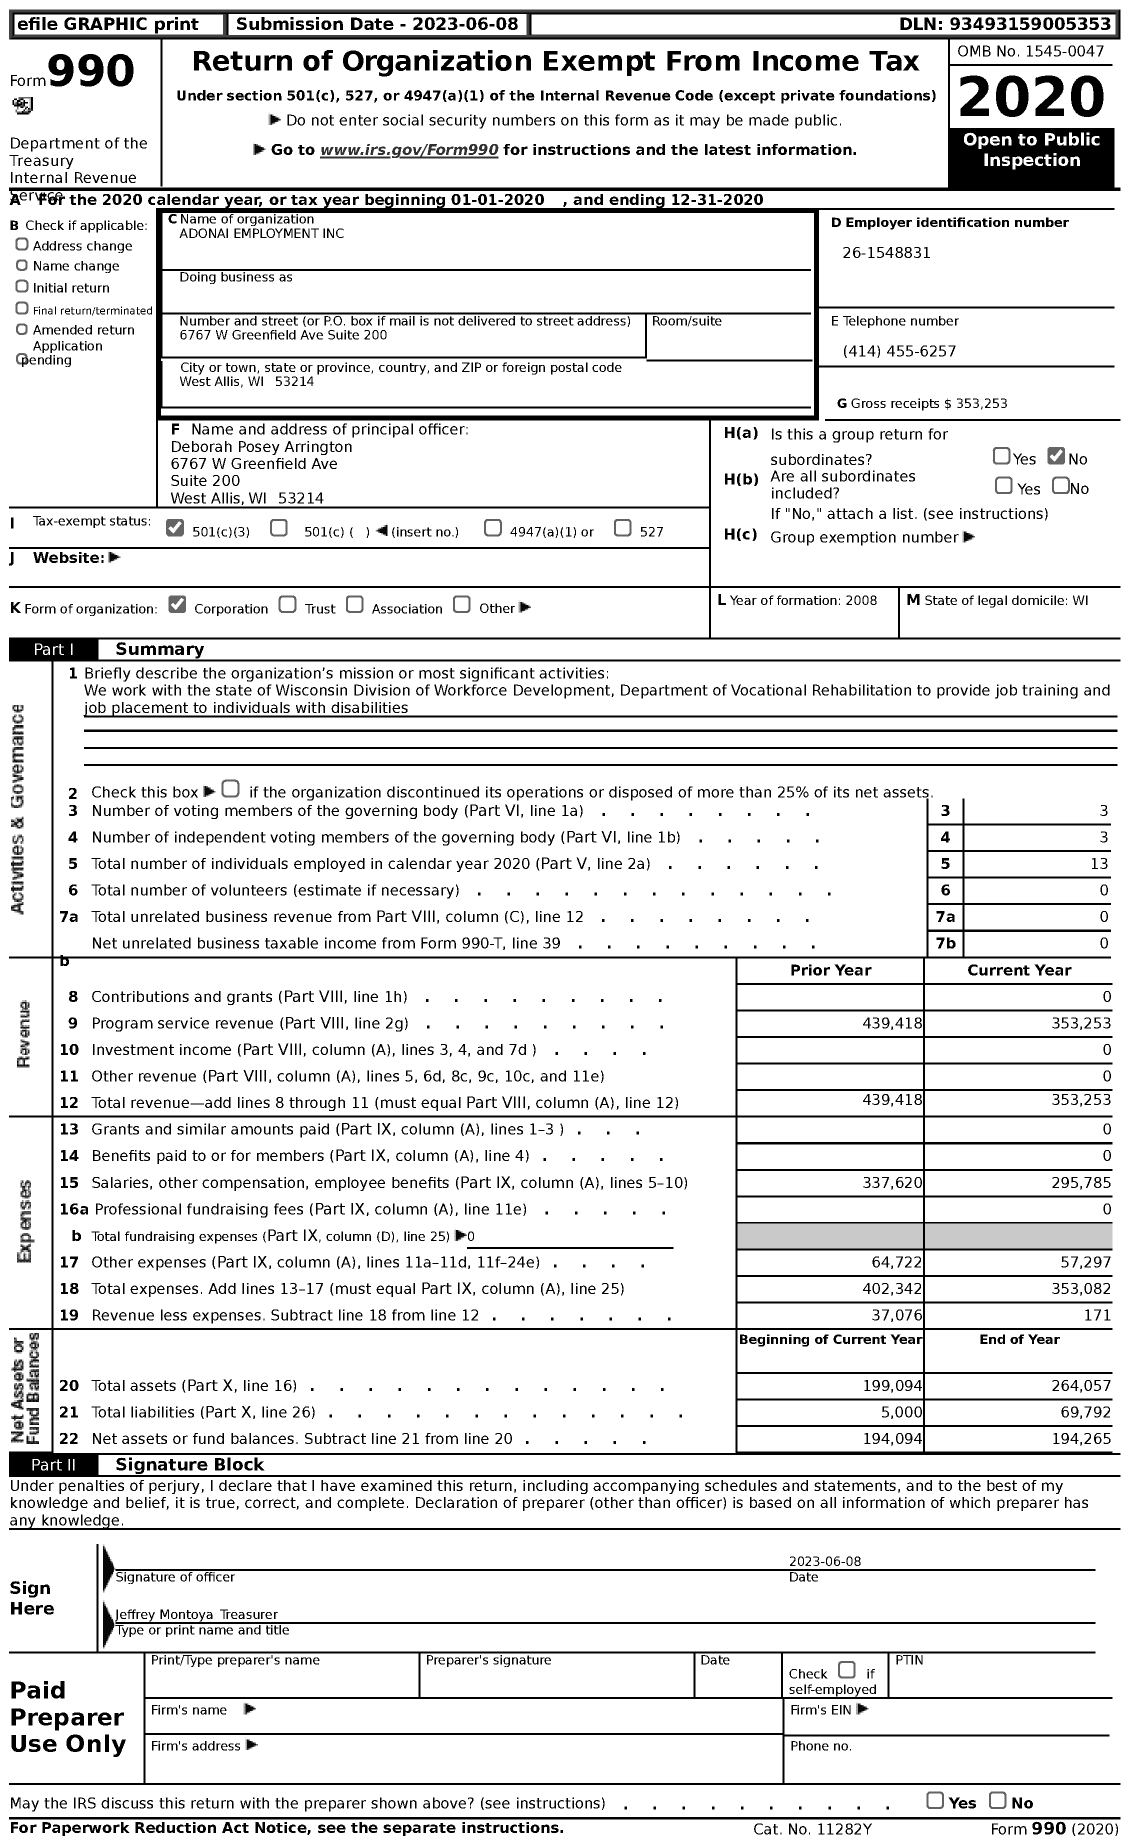 Image of first page of 2020 Form 990 for Adonai Employment